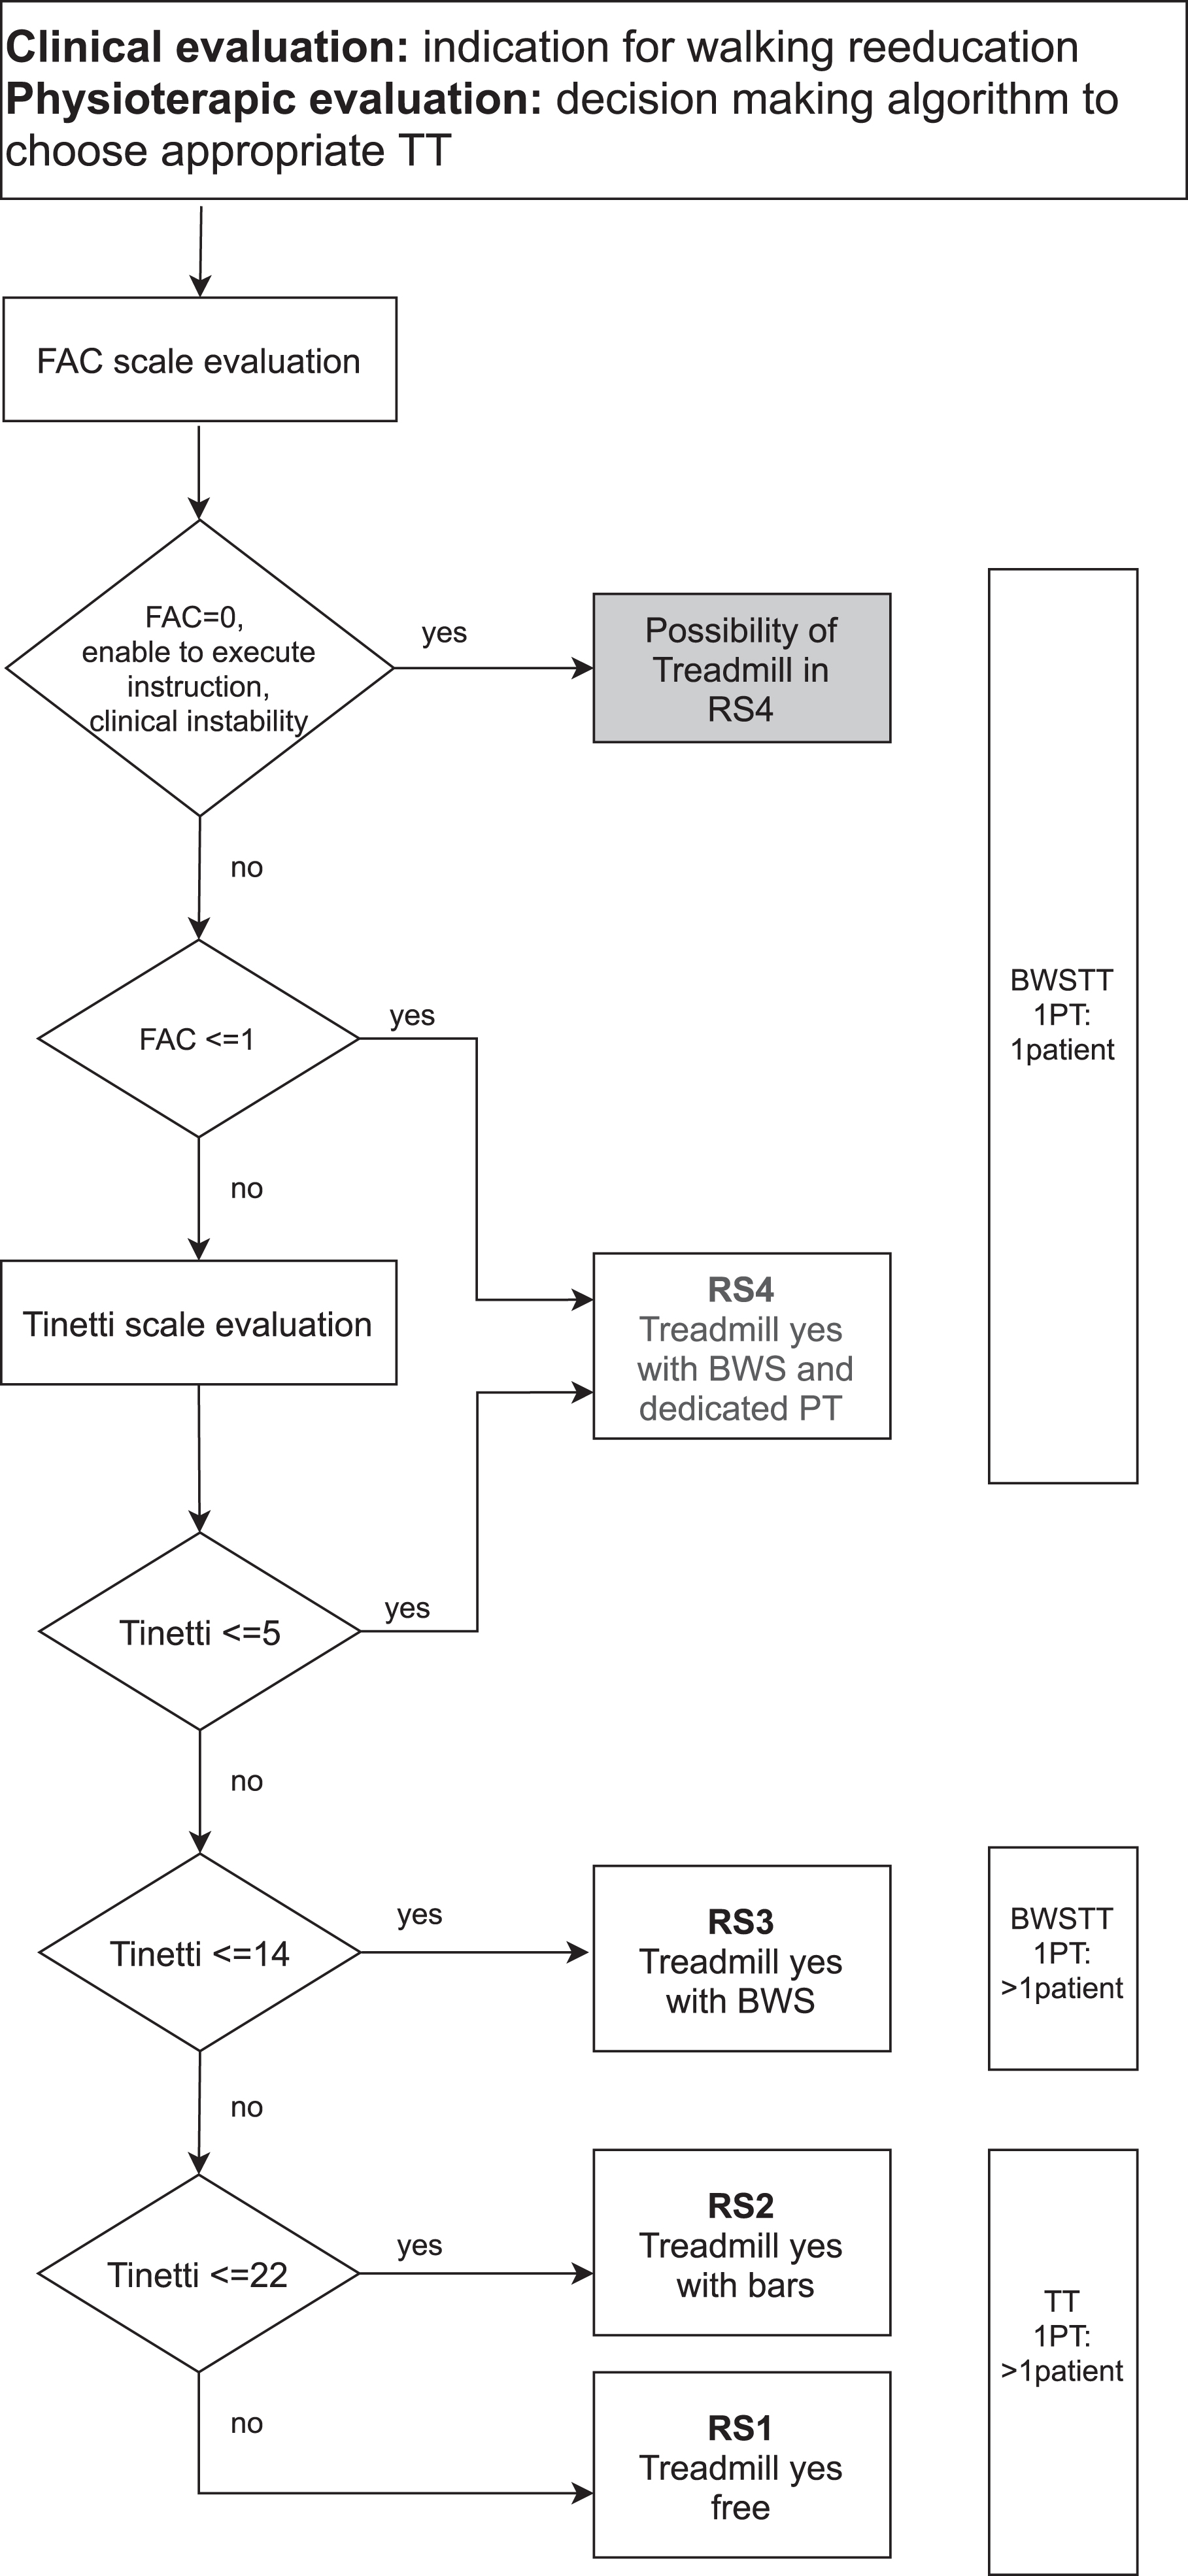 Flowchart of Decision making algorithm for TT. Legend: FreeTT = Free treadmill training; BWSTT = Body weight support treadmill training; FAC = Functional Ambulation Classification; FIM = Functional Independence Measure; Tinetti = Tinetti Performance-Oriented Mobility Assessment A + B component; PT = physiotherapist.